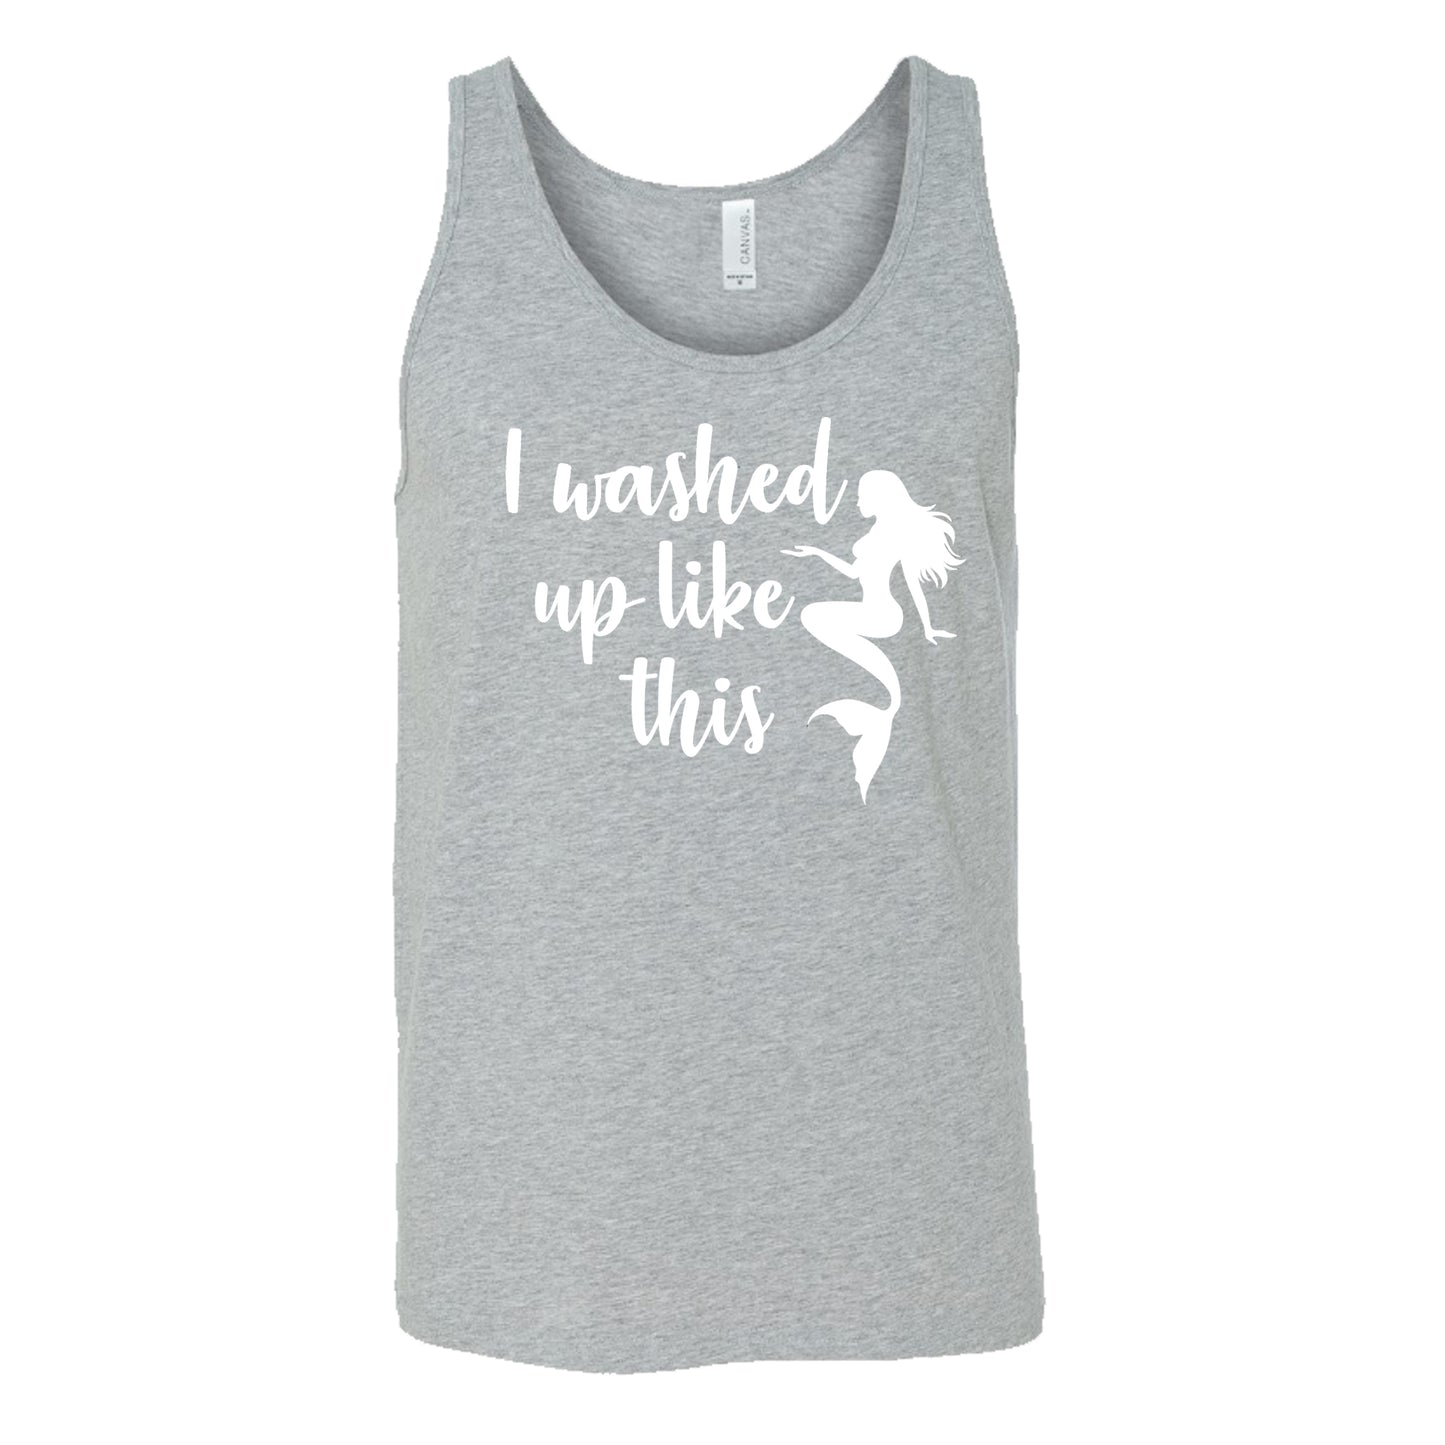 grey unisex tank with the saying "i washed up like this" in white in the center